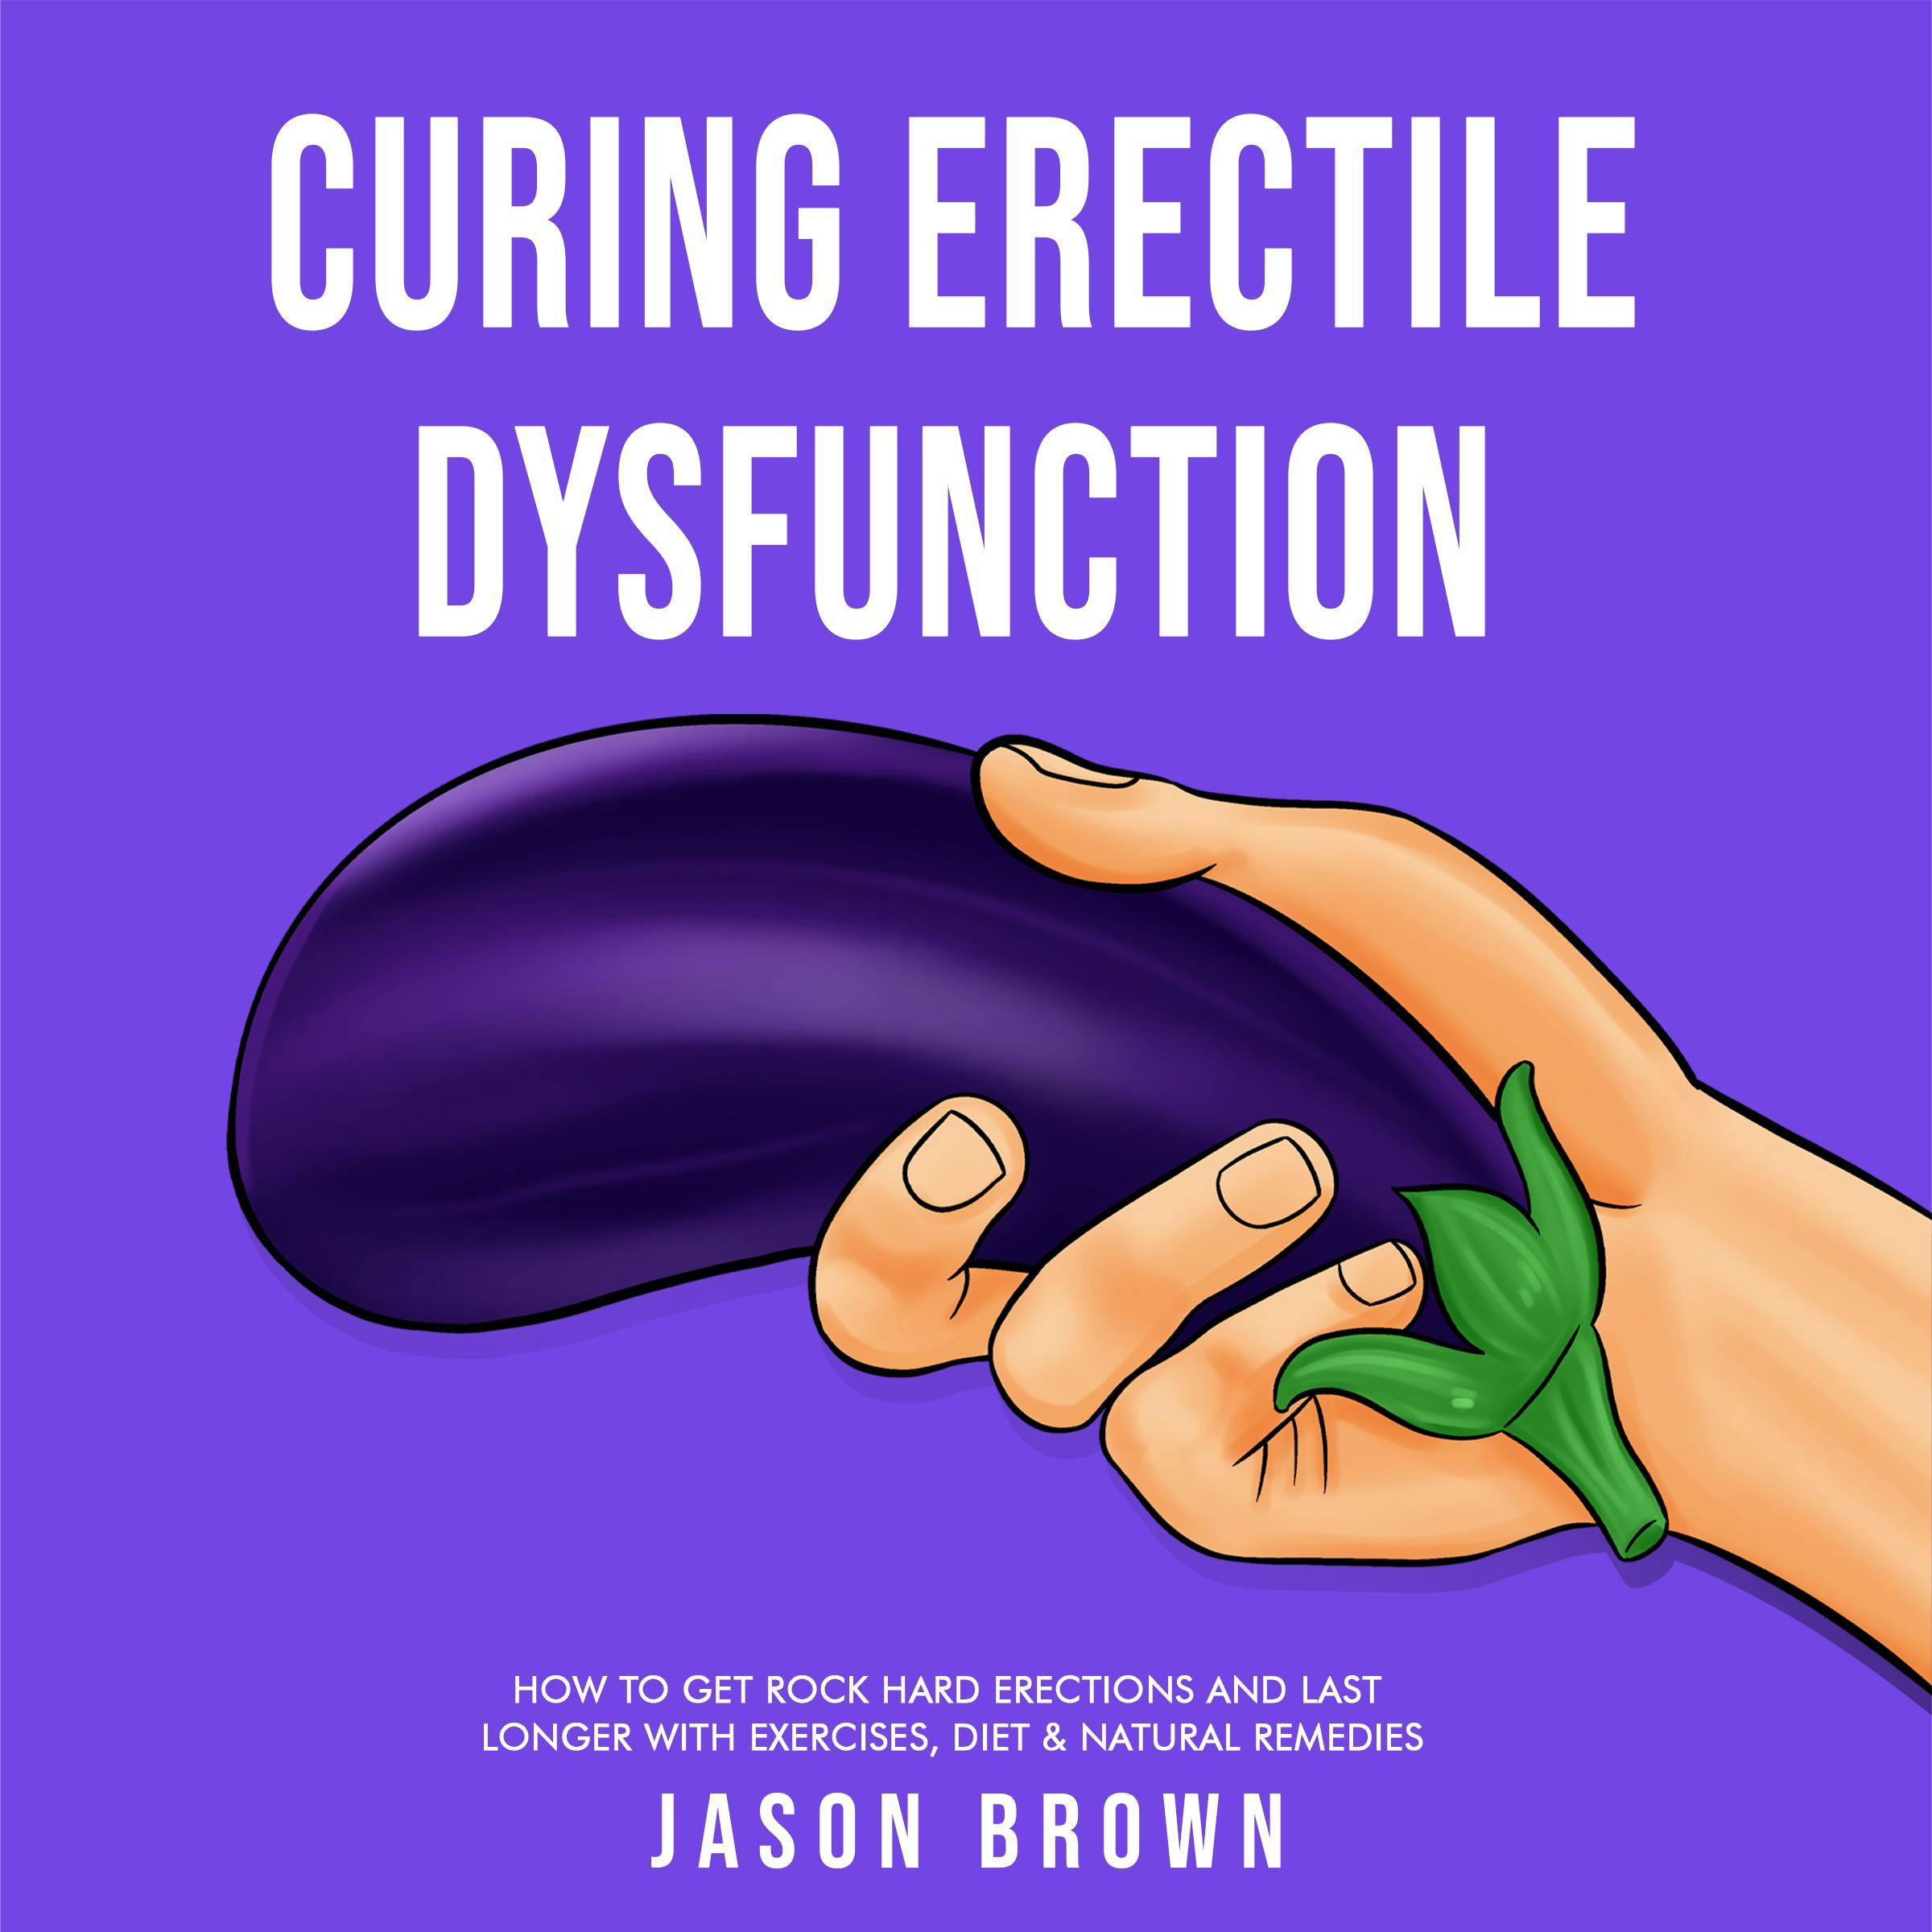 Curing Erectile Dysfunction - How to Get Rock Hard Erections and Last Longer With Exercises, Diet & Natural Remedies - Jason Brown